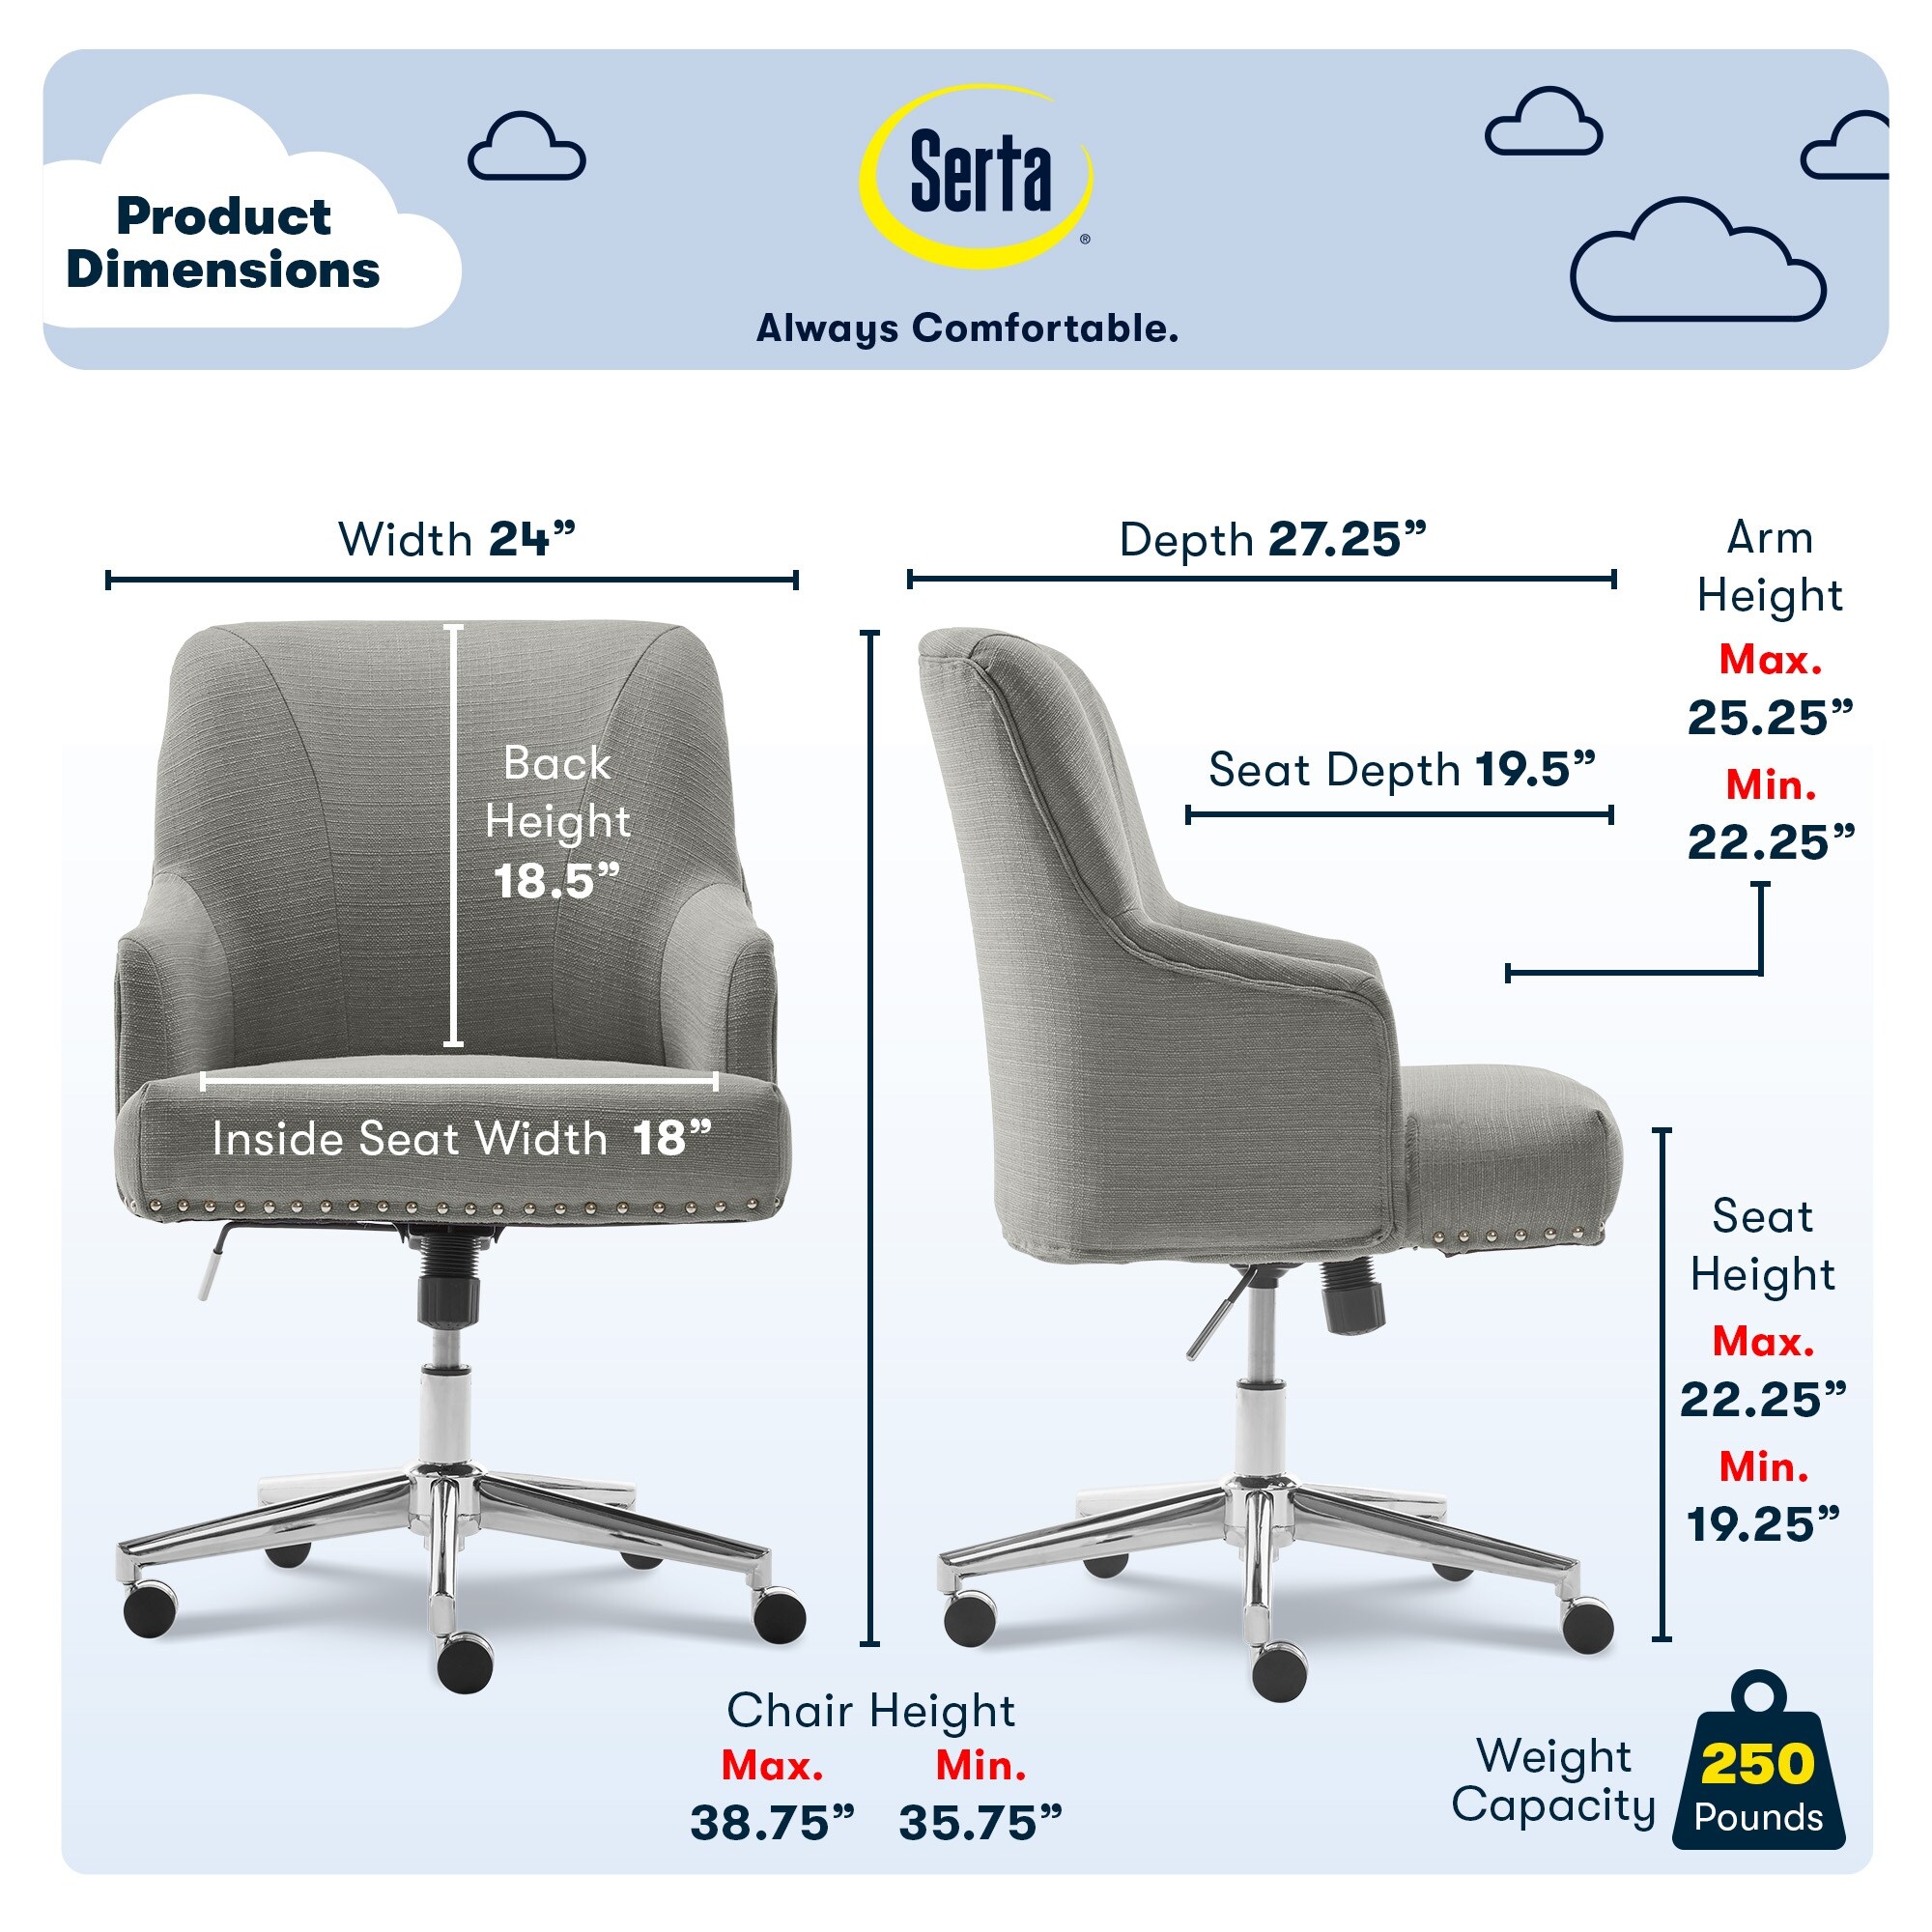 https://ak1.ostkcdn.com/images/products/is/images/direct/8751c6291252a3e8d300516fccf3e389aa71016c/Serta-Leighton-Home-Office-Chair-with-Memory-Foam%2C-Chrome-Finished-Stainless-Steel-Base%2C-Twill-Fabric.jpg